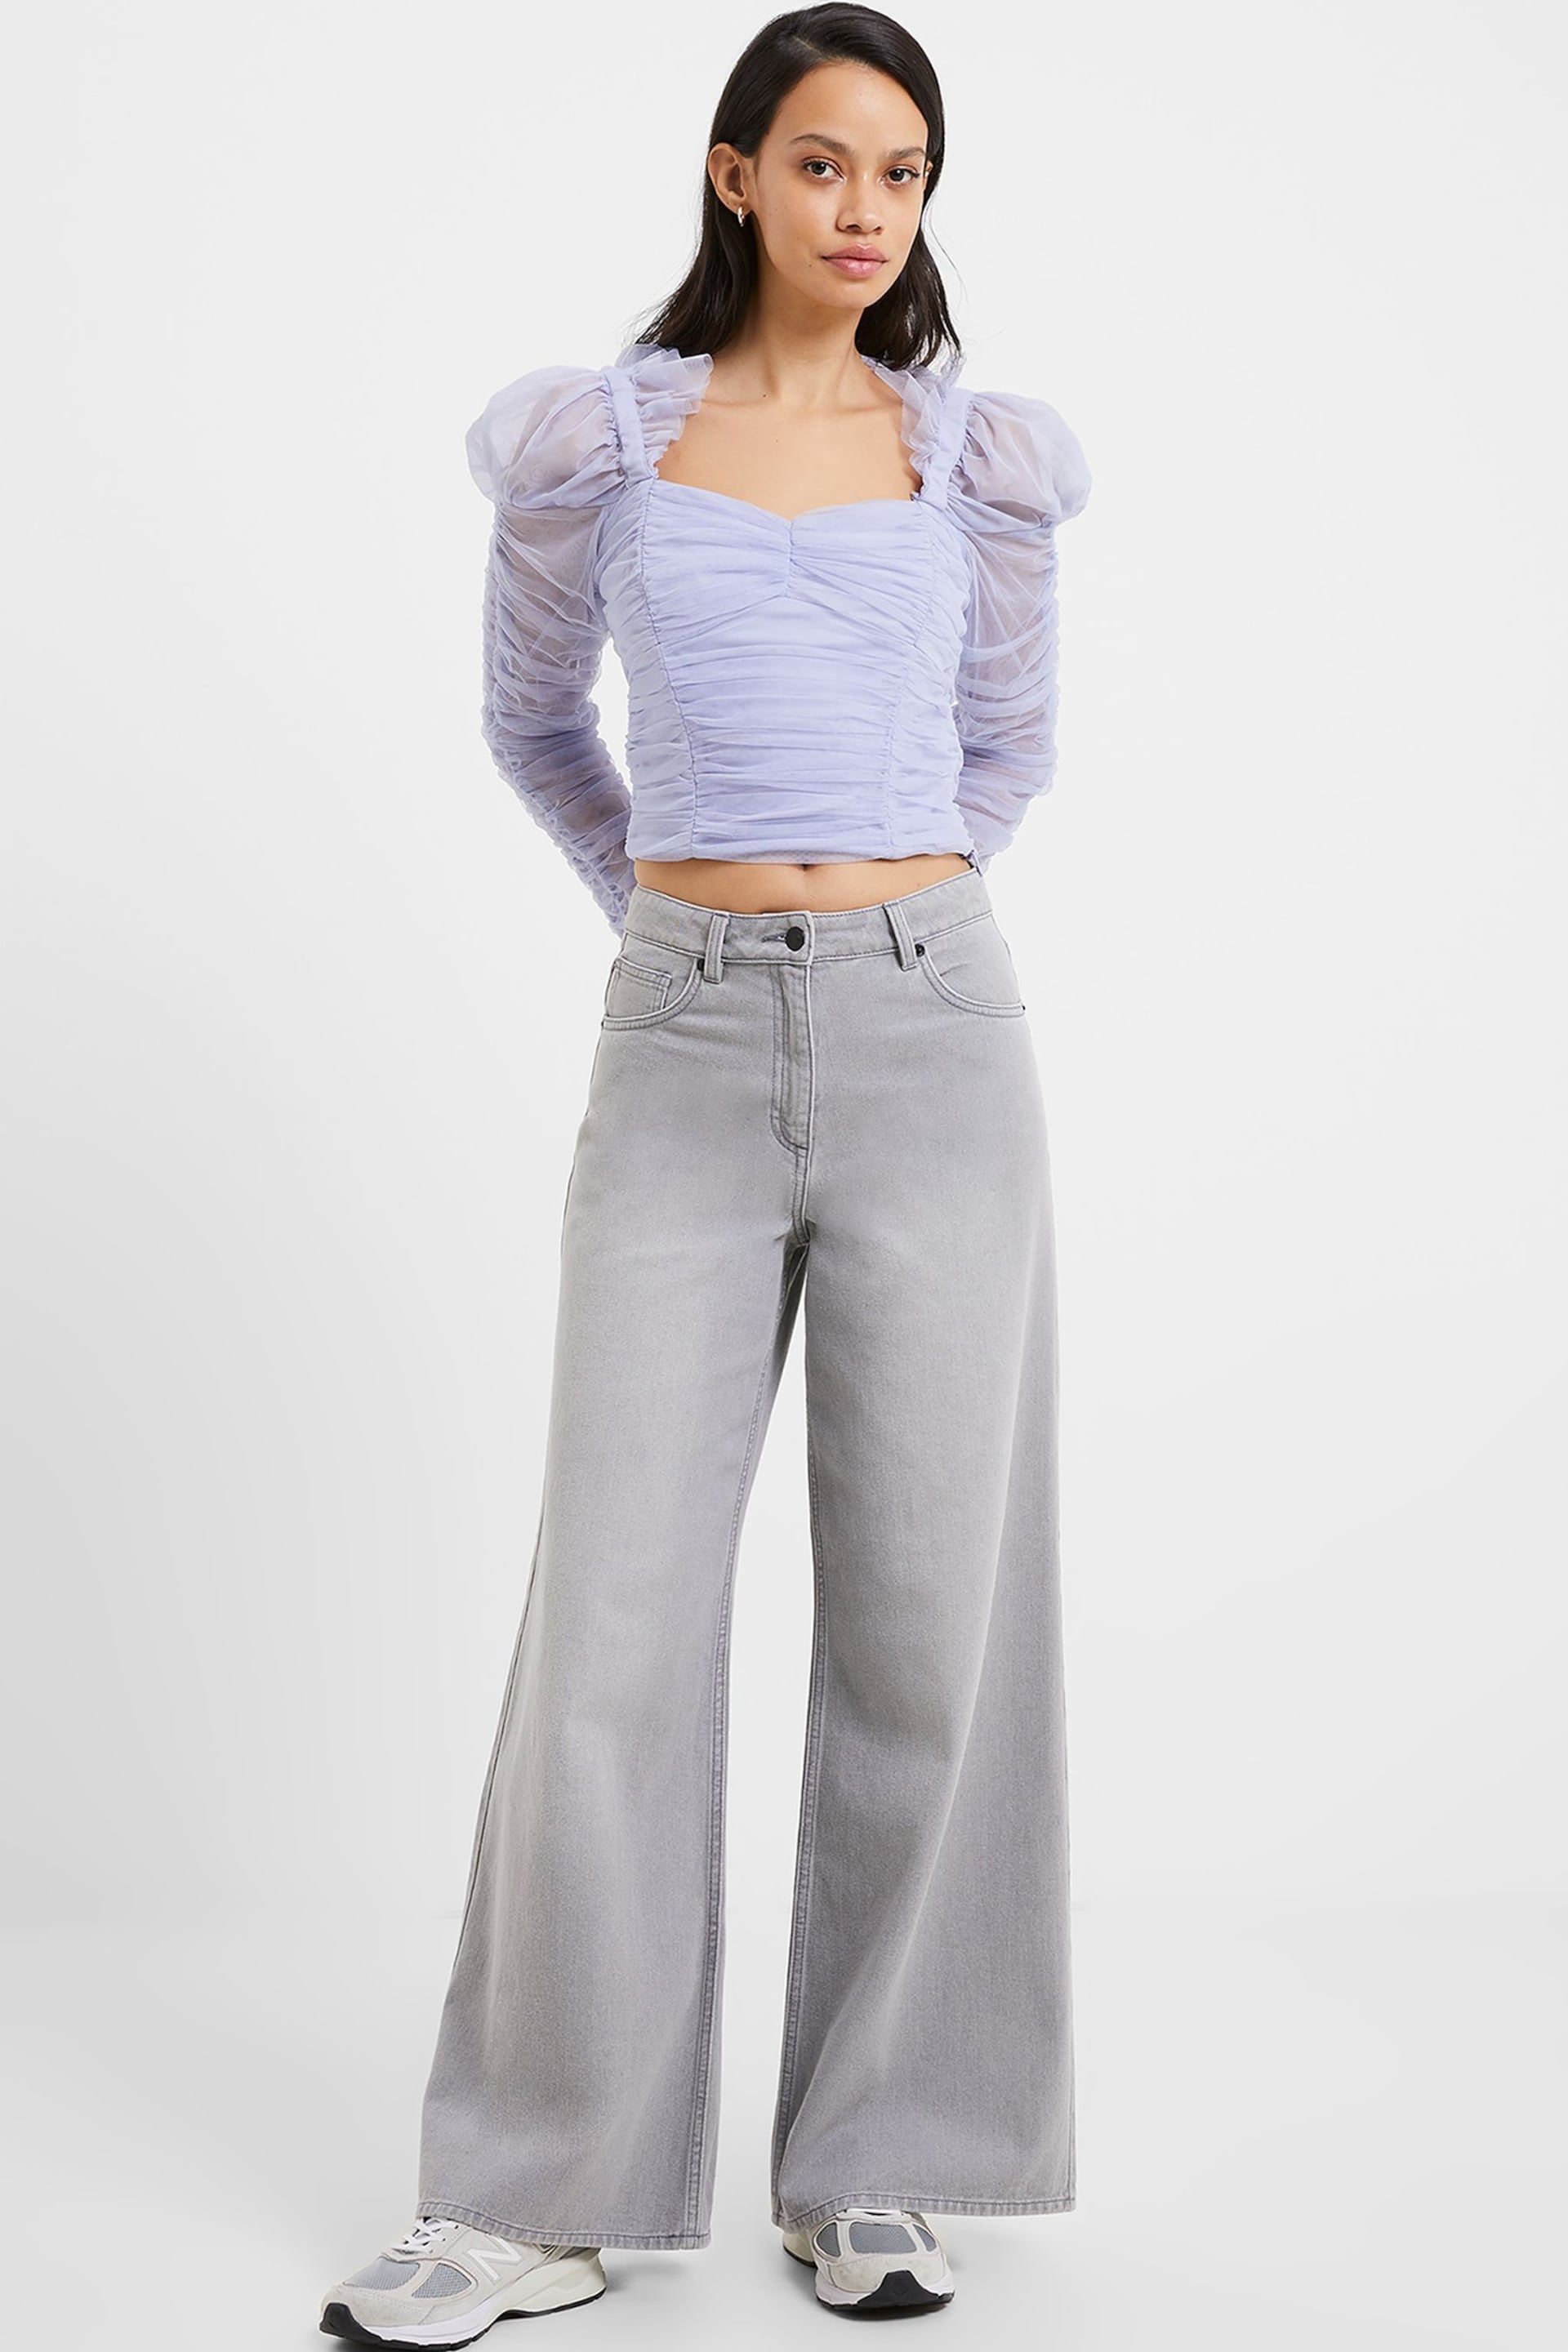 French Connection Relaxed Denver Denim Wide Leg Jeans - Image 1 of 4